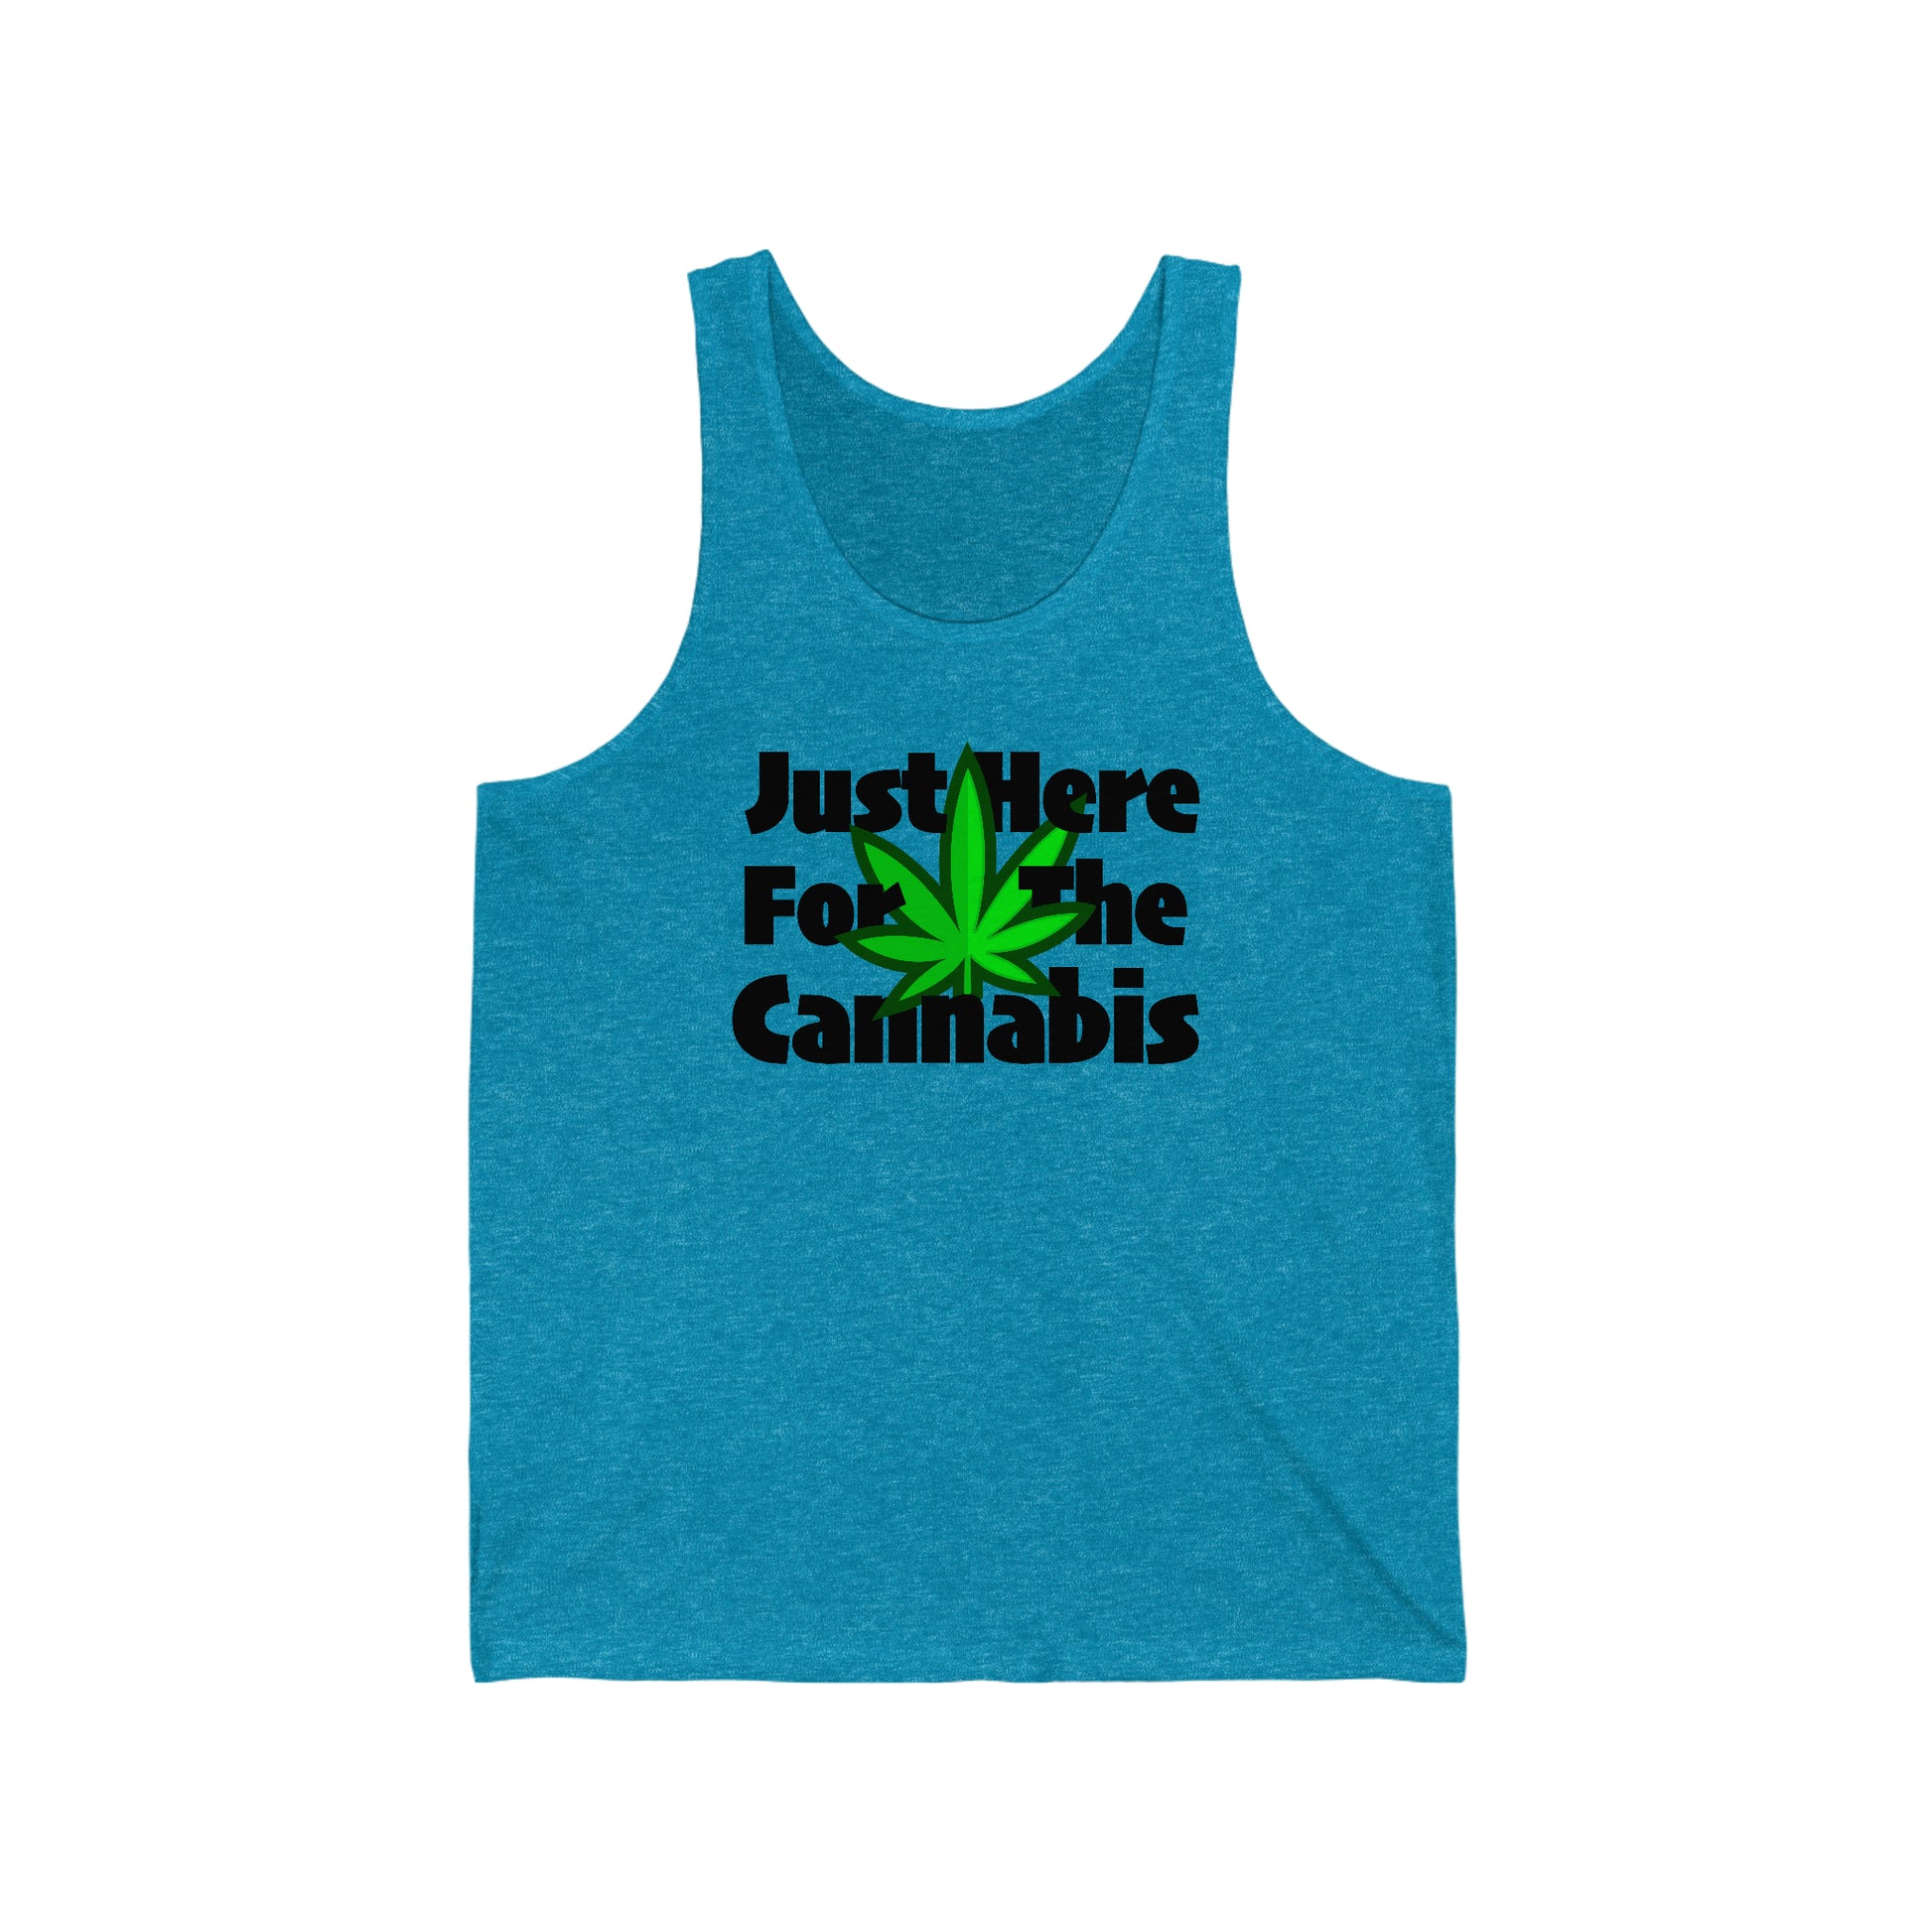 Just here for the Just Here for the Cannabis Jersey Tank Top.